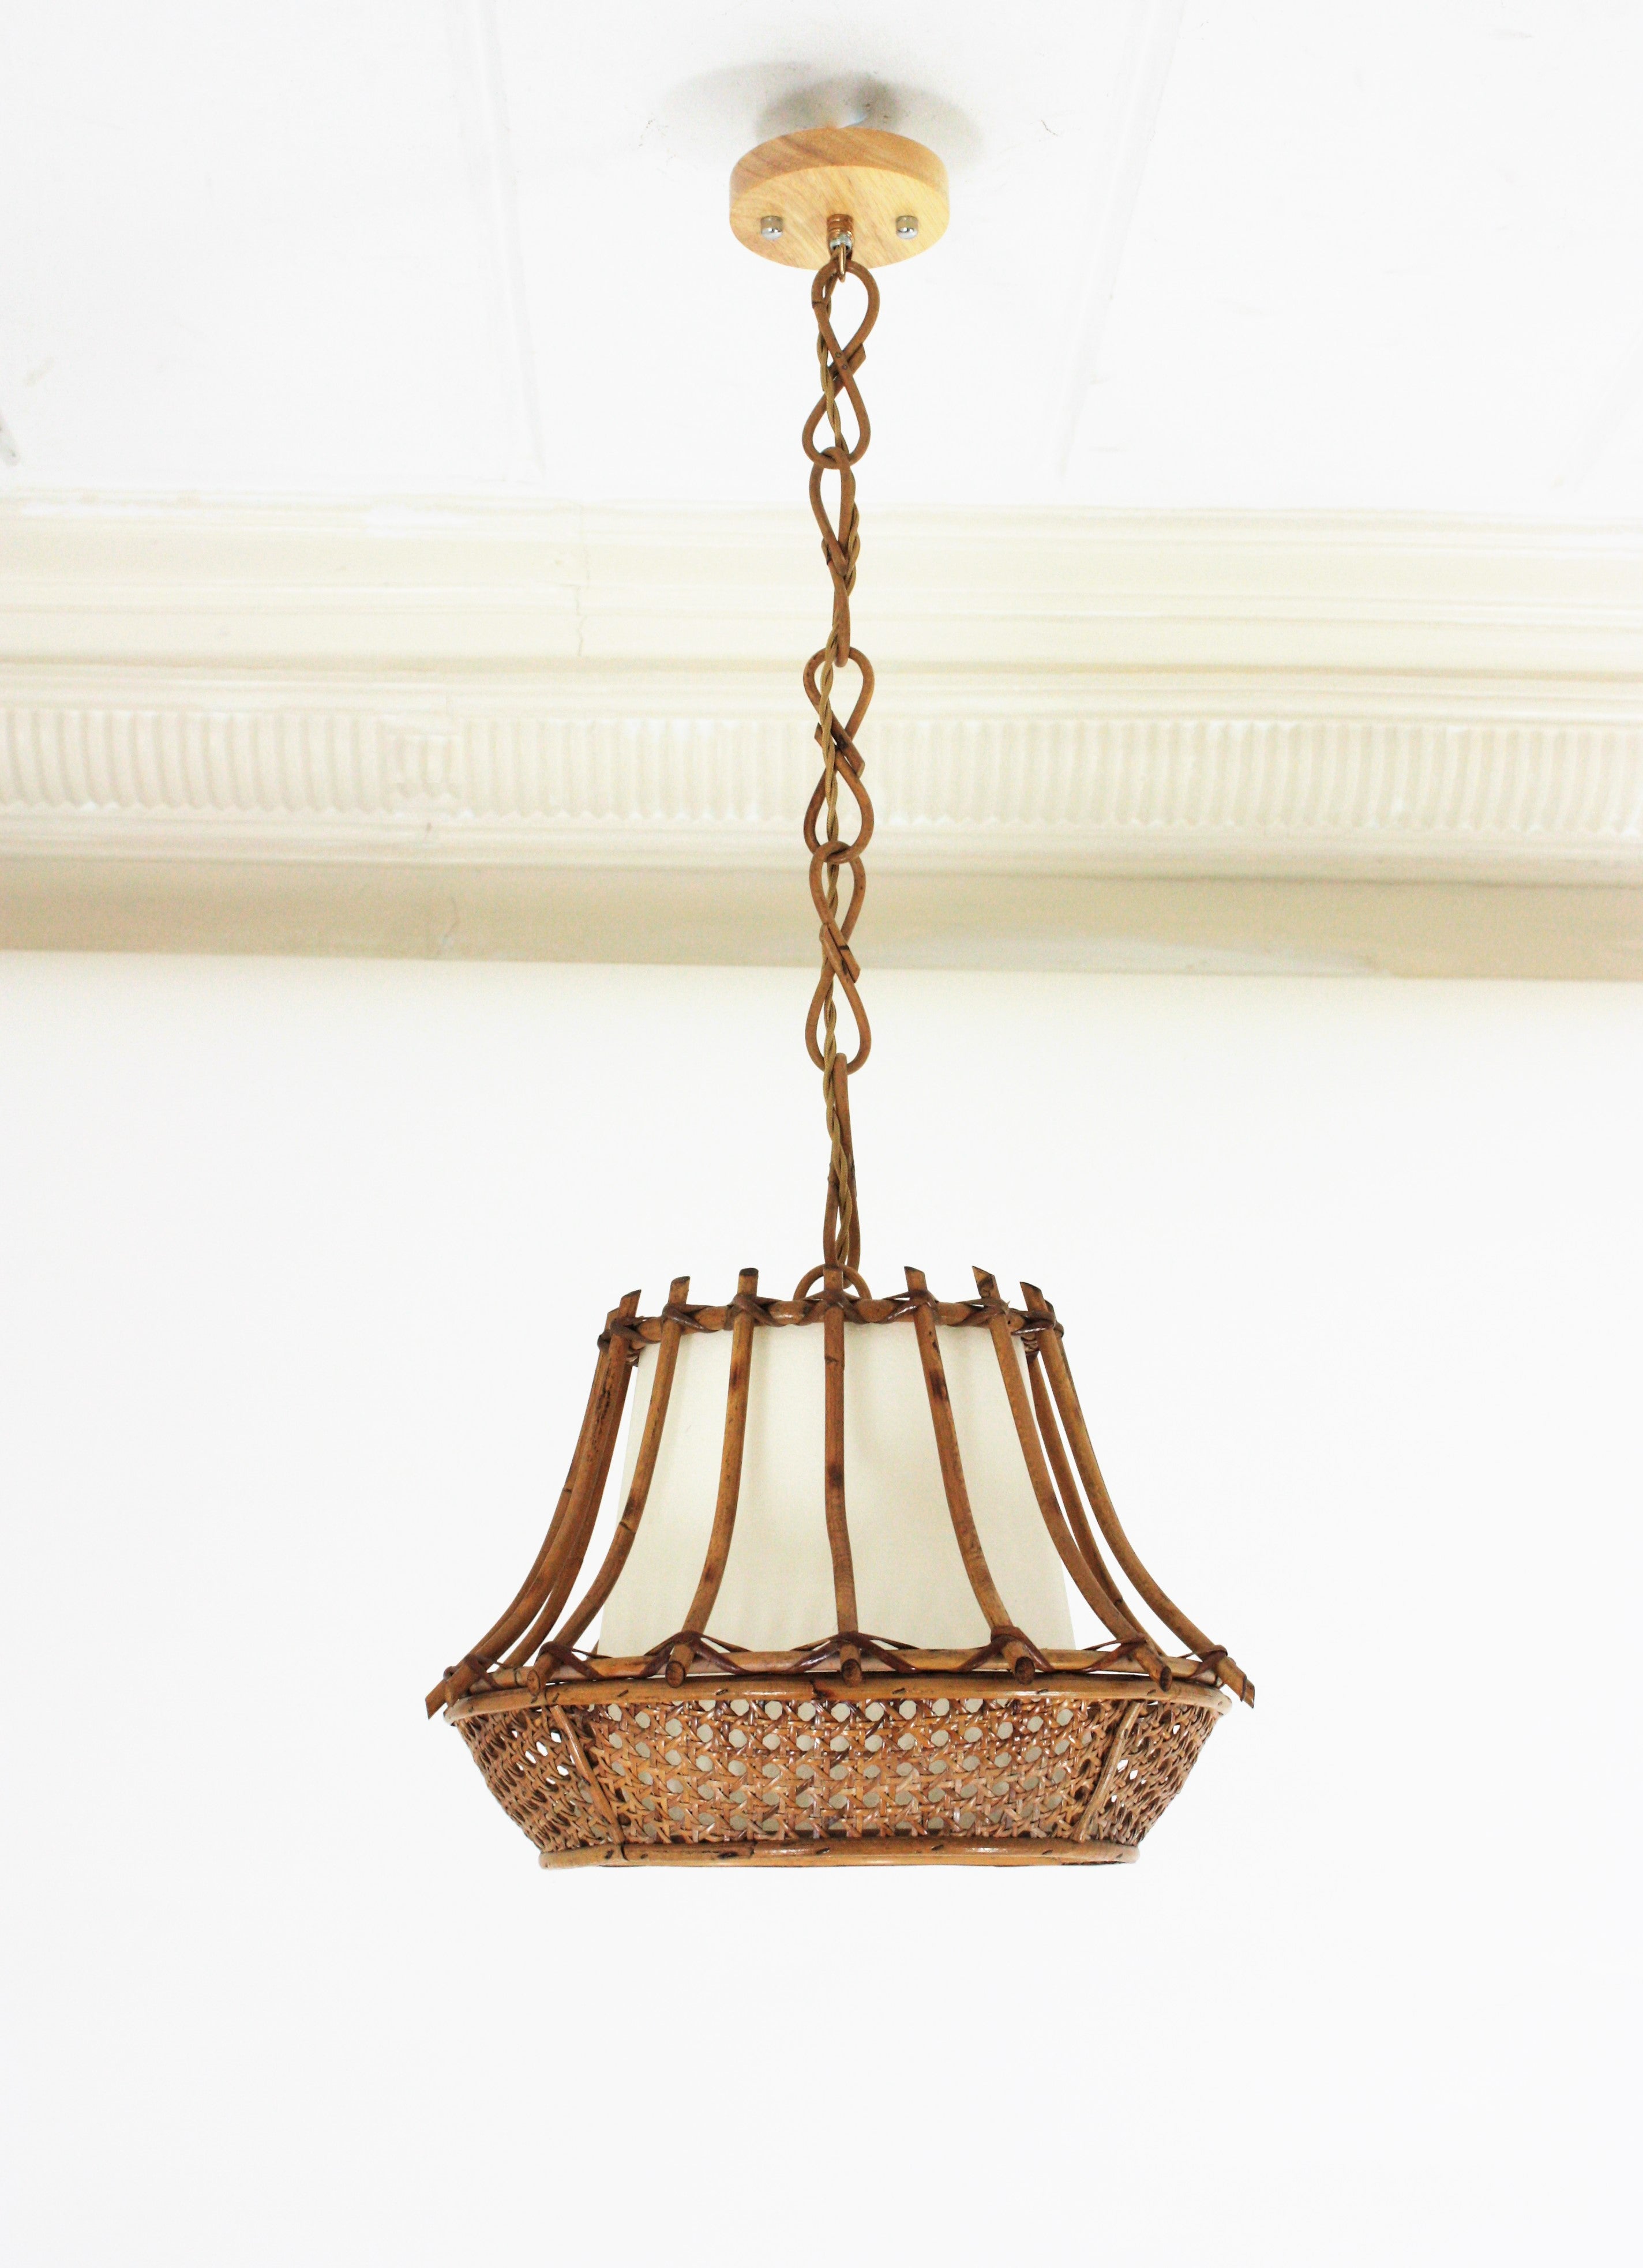 Rattan and Wicker wire pagoda shaped pendant or chandelier, France, 1960s.
This midcentury suspension lamp features a wicker weave conical lampshade with rattan vertical canes and and interior paper lampshade to difusse the light. It hangs from a